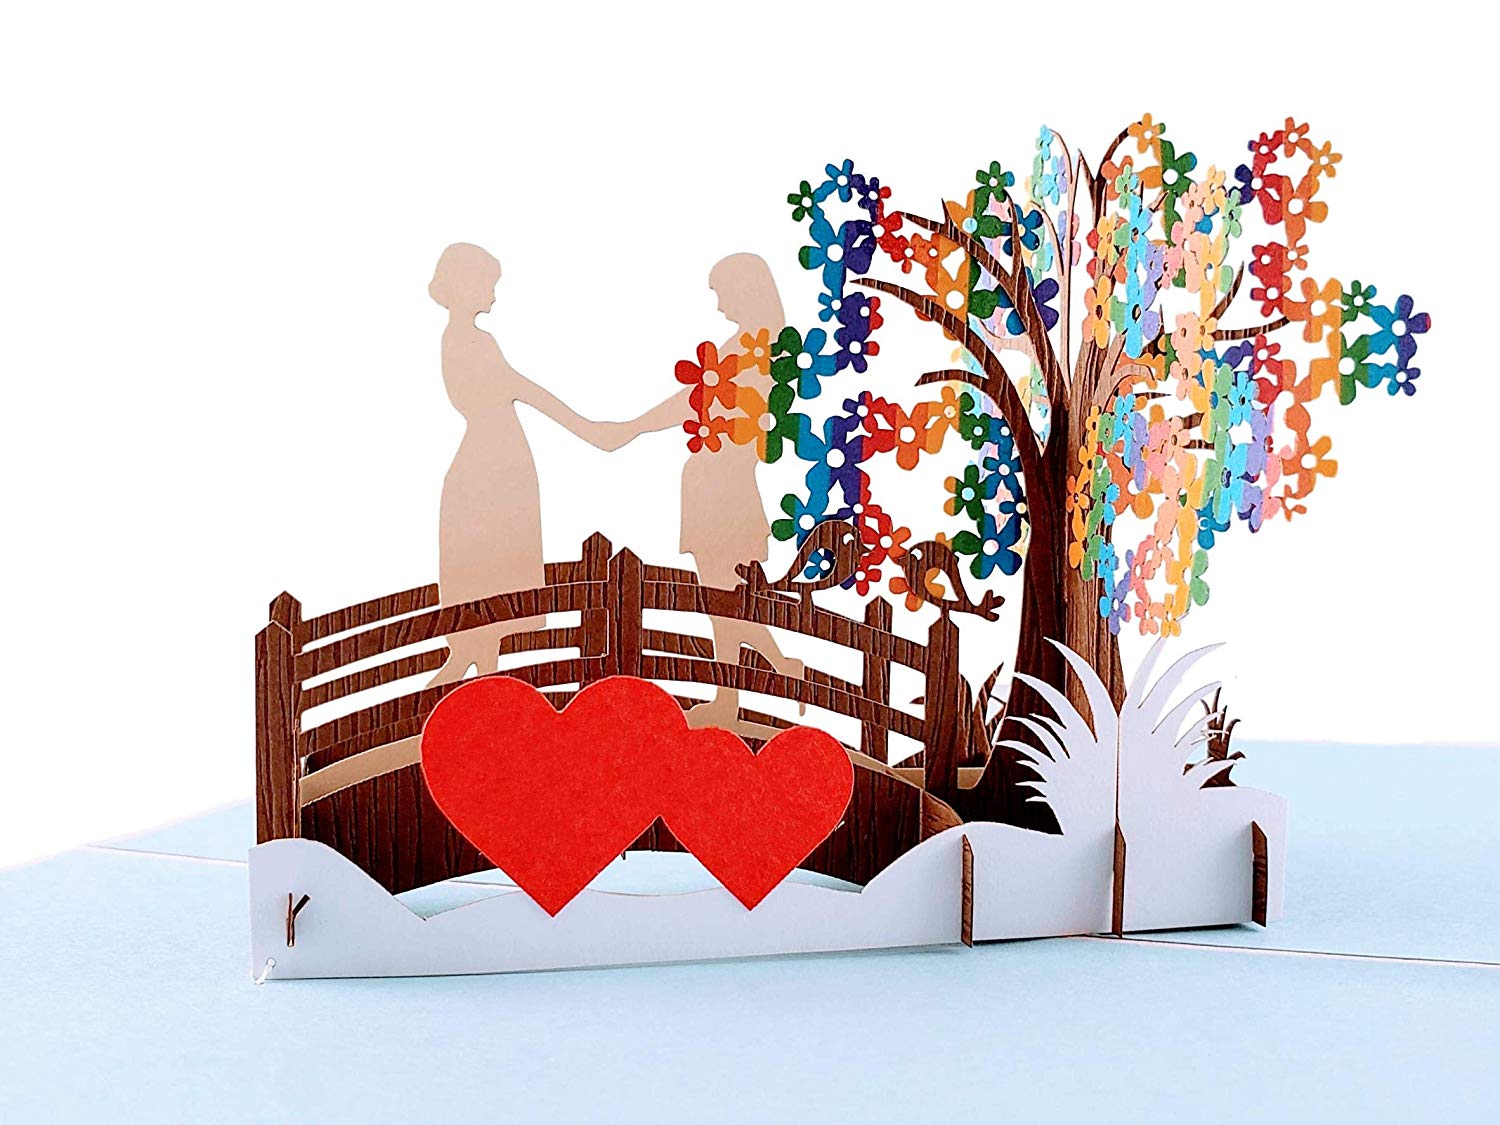 Lesbian Couple True Love 3D Pop Up Greeting Card - Front Page - LGBT - LGBTQ - Love - new arrival - iGifts And Cards